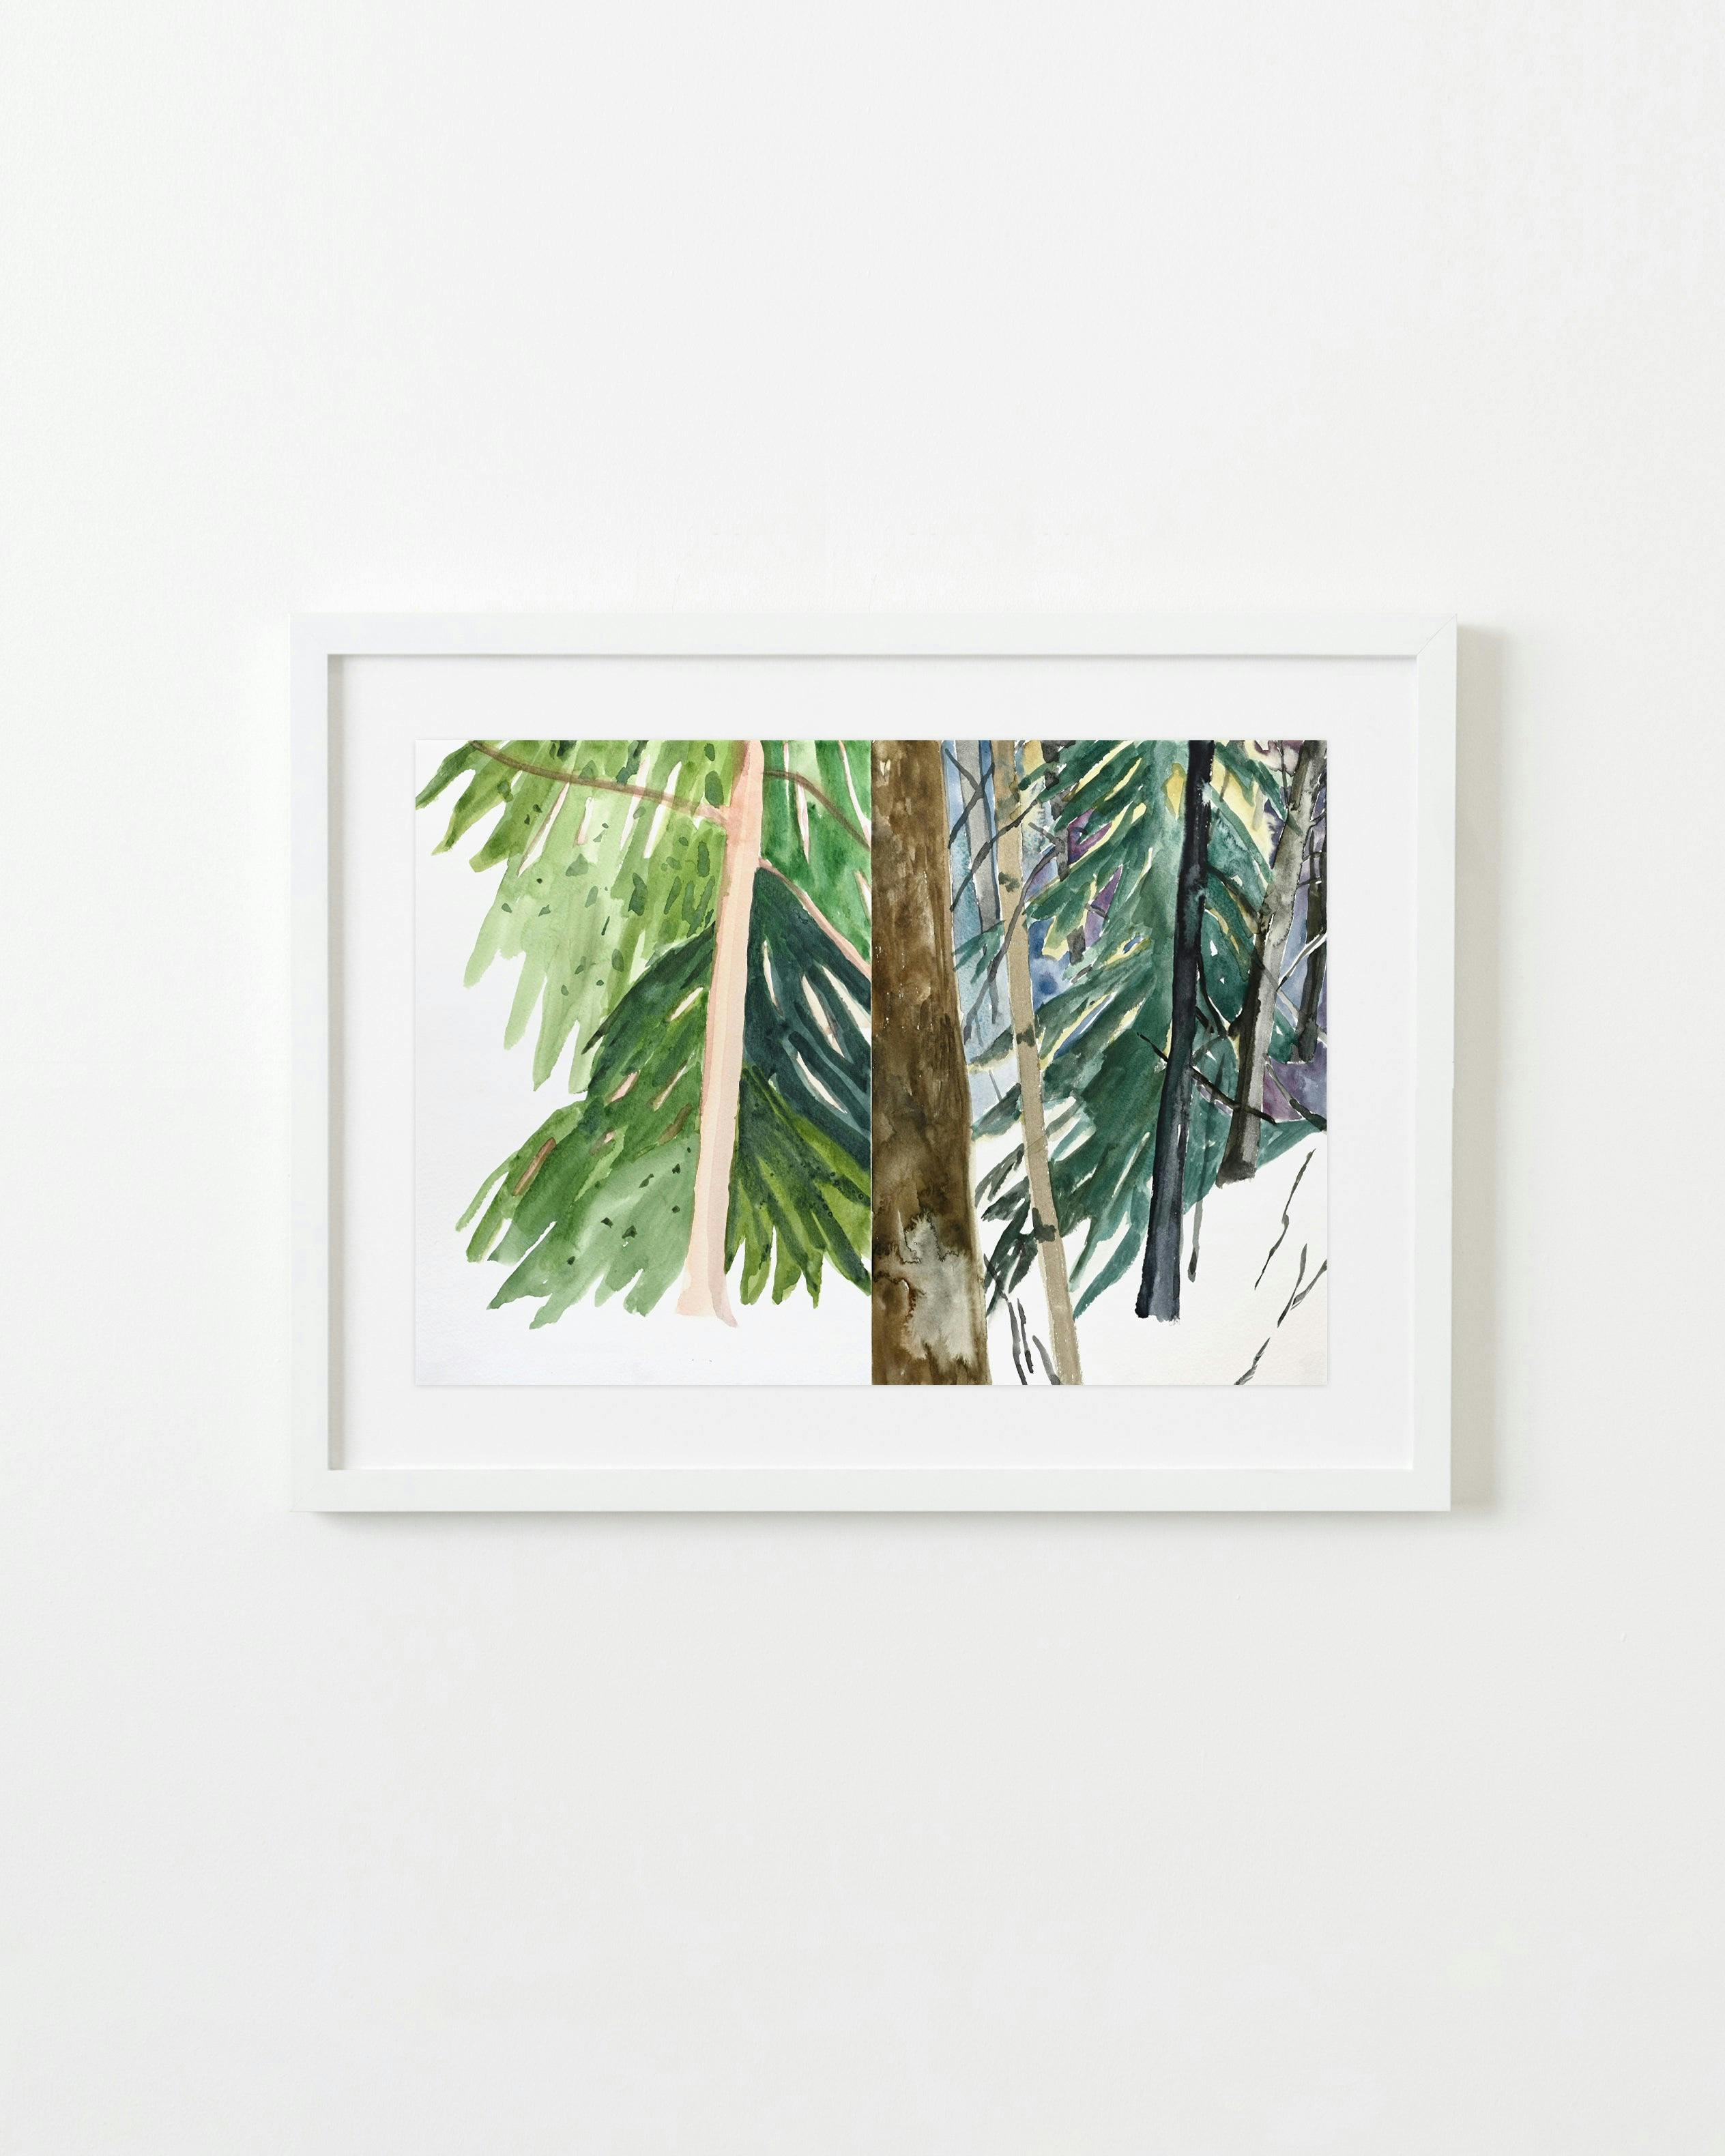 Painting by Una Ursprung titled "Conifers in the snow".